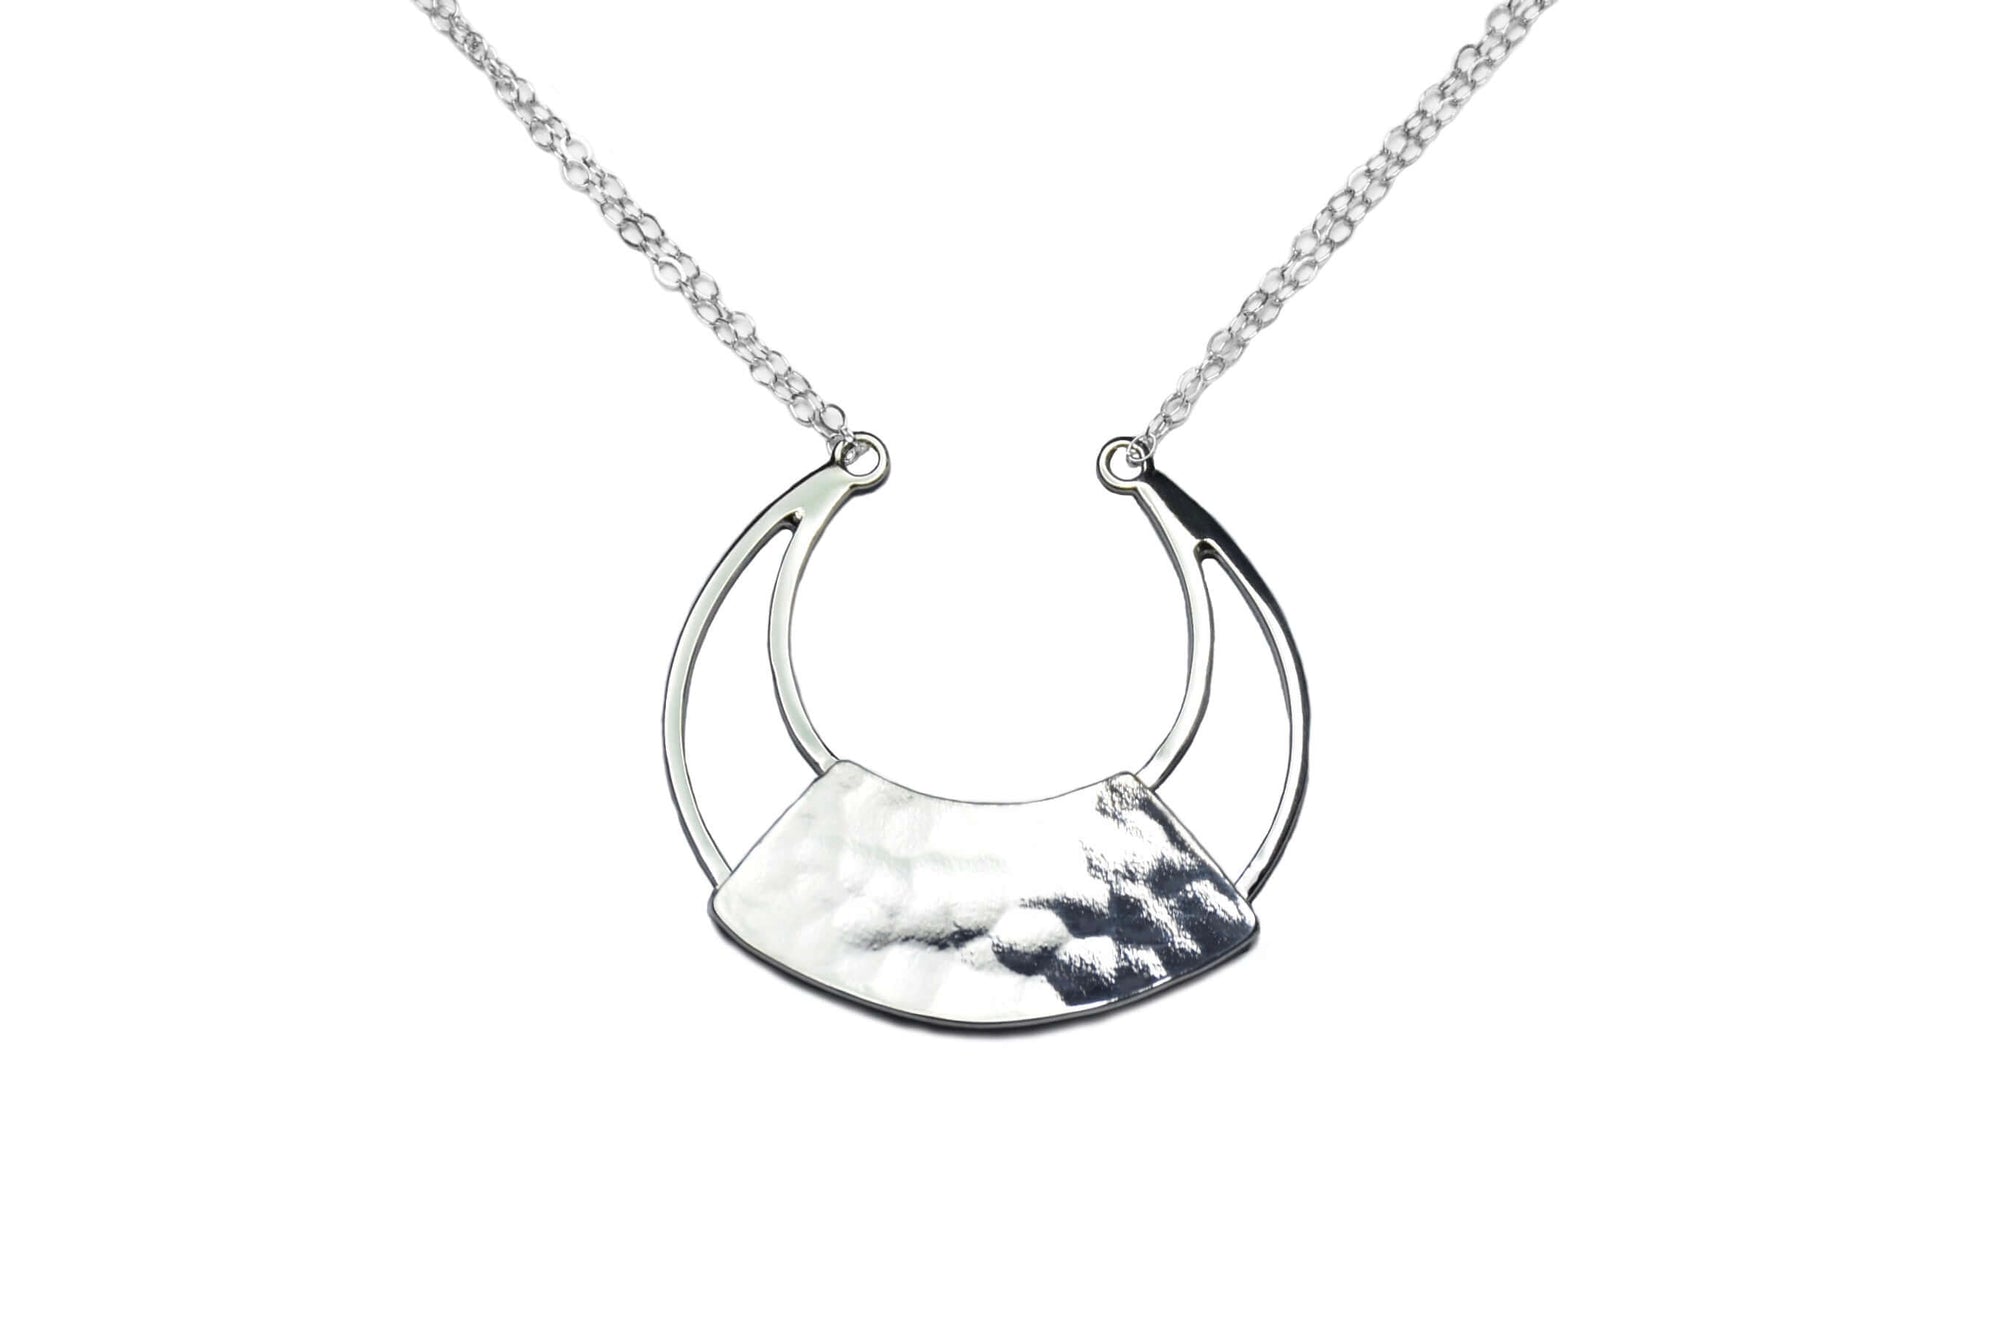 A handmade sterling silver torc necklace on a silver chain